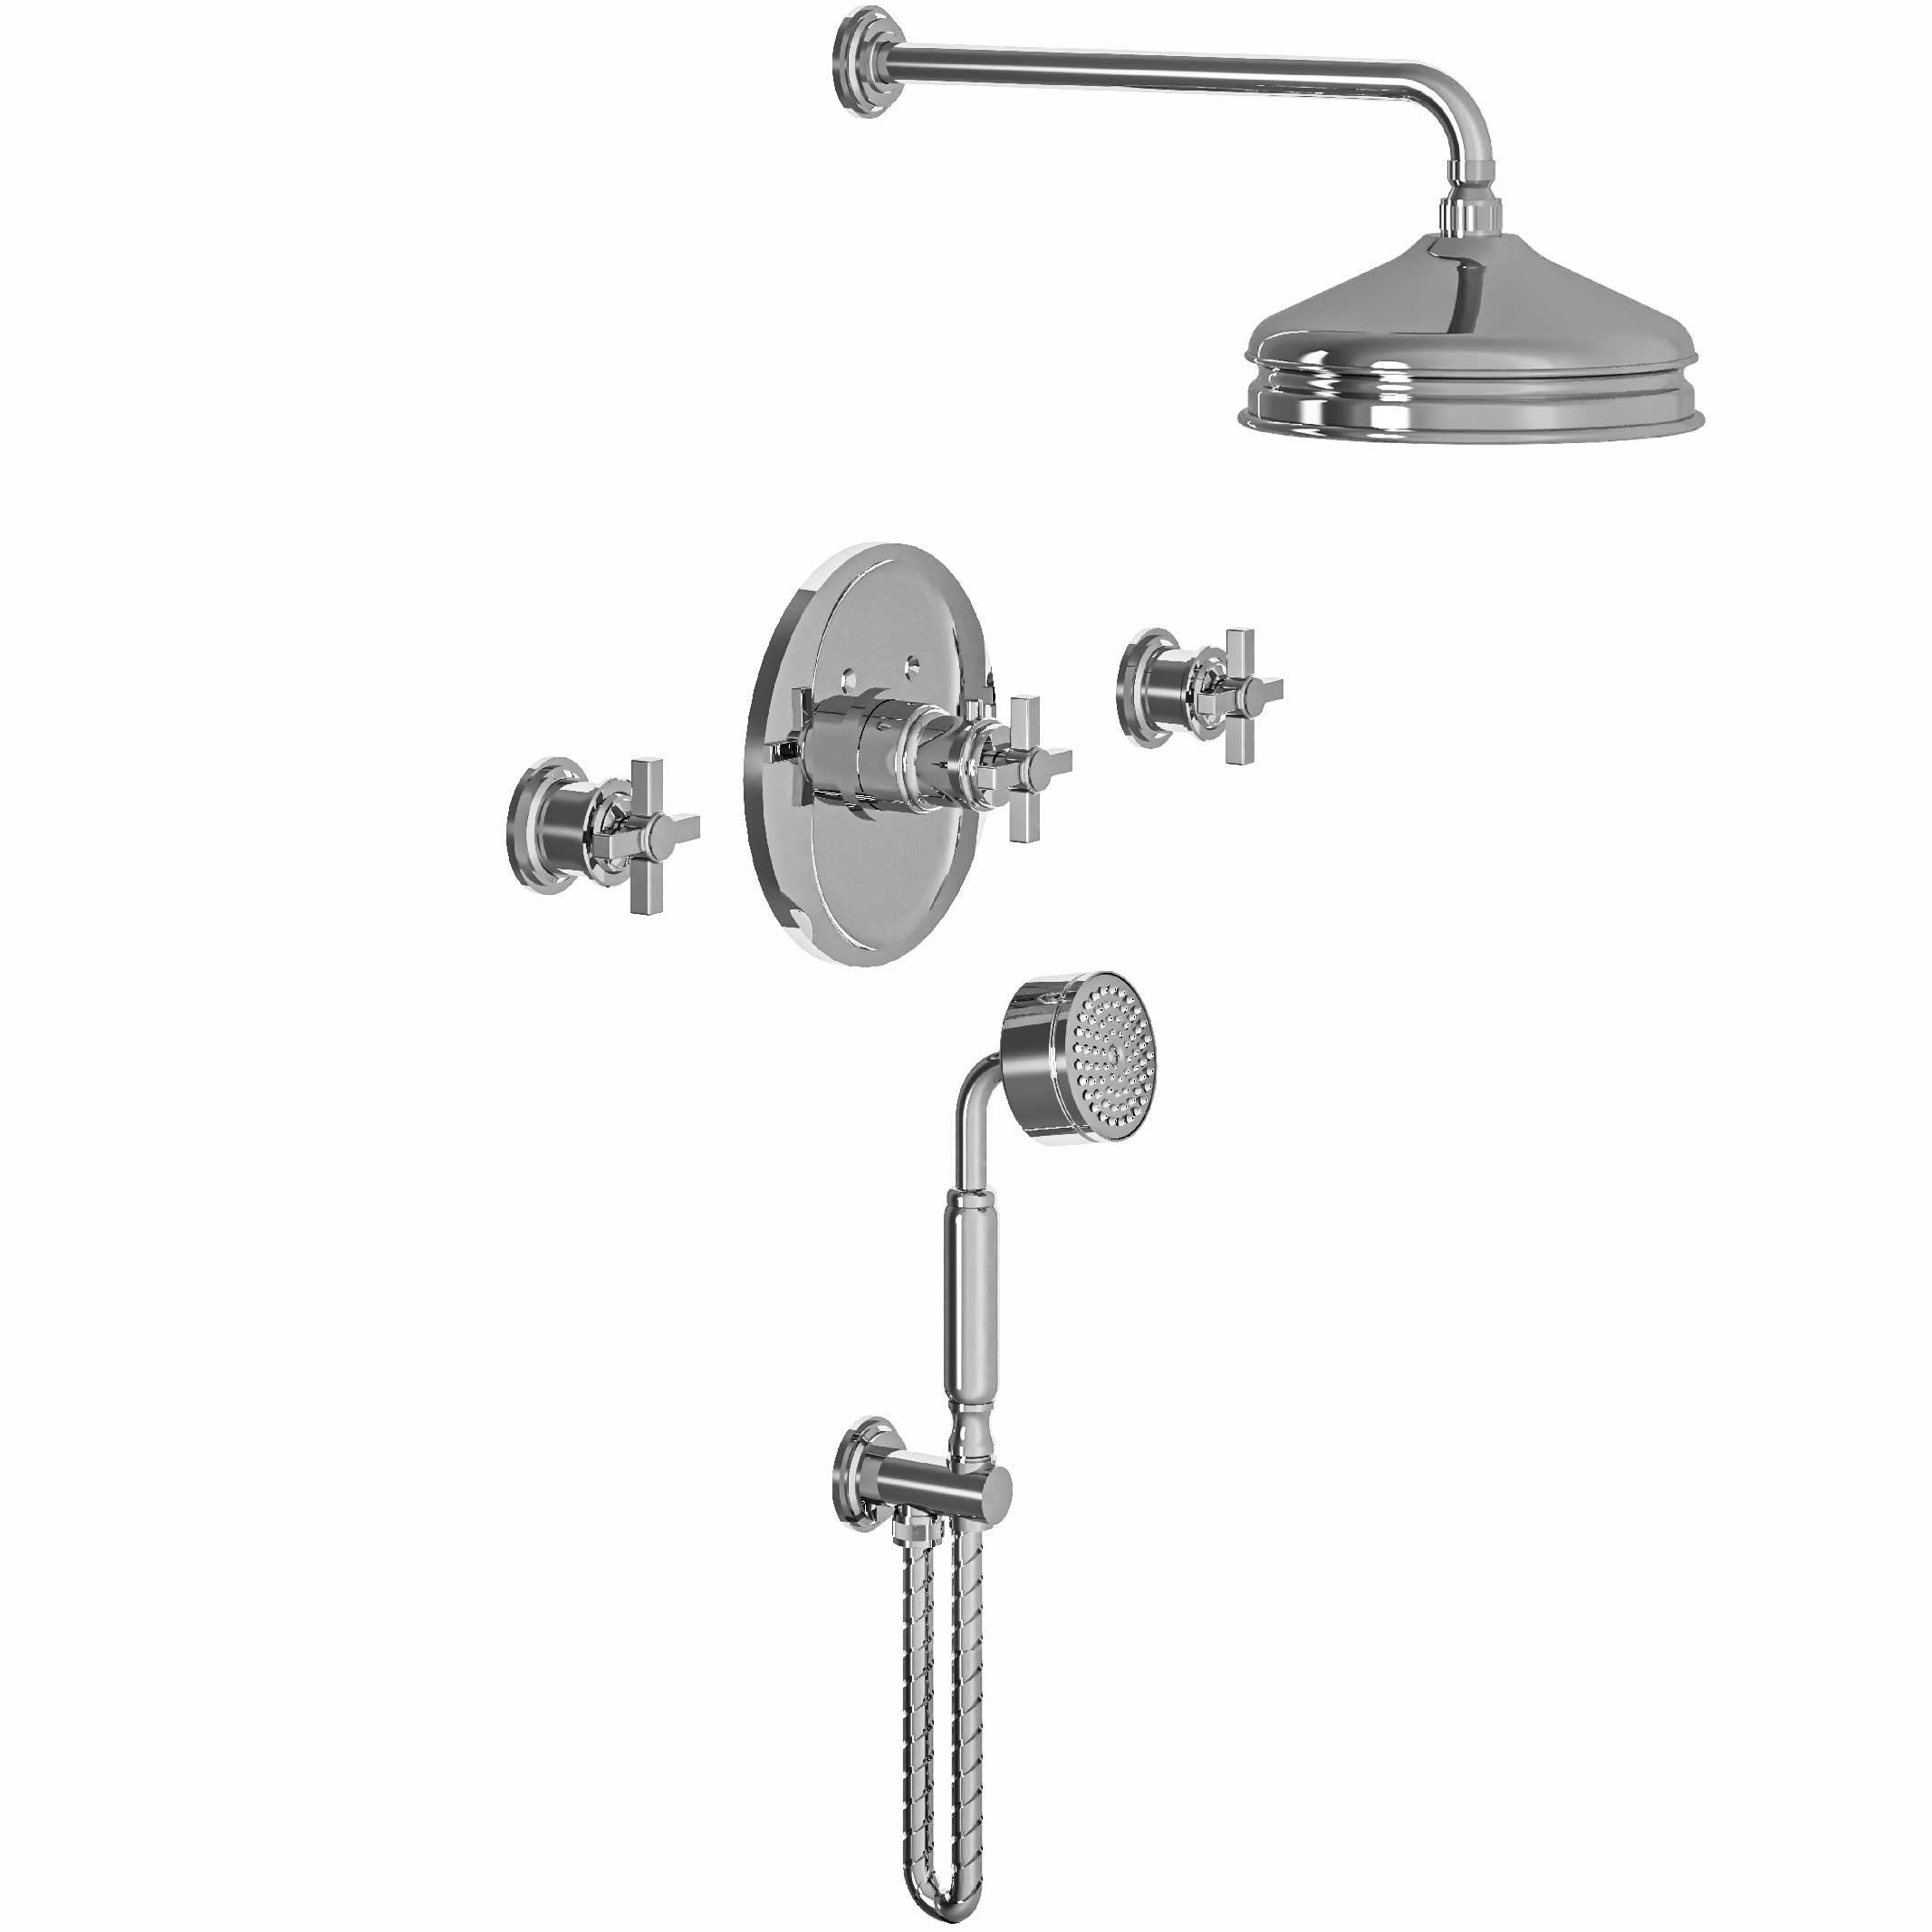 M60-2308T1 Thermostatic shower mixer package